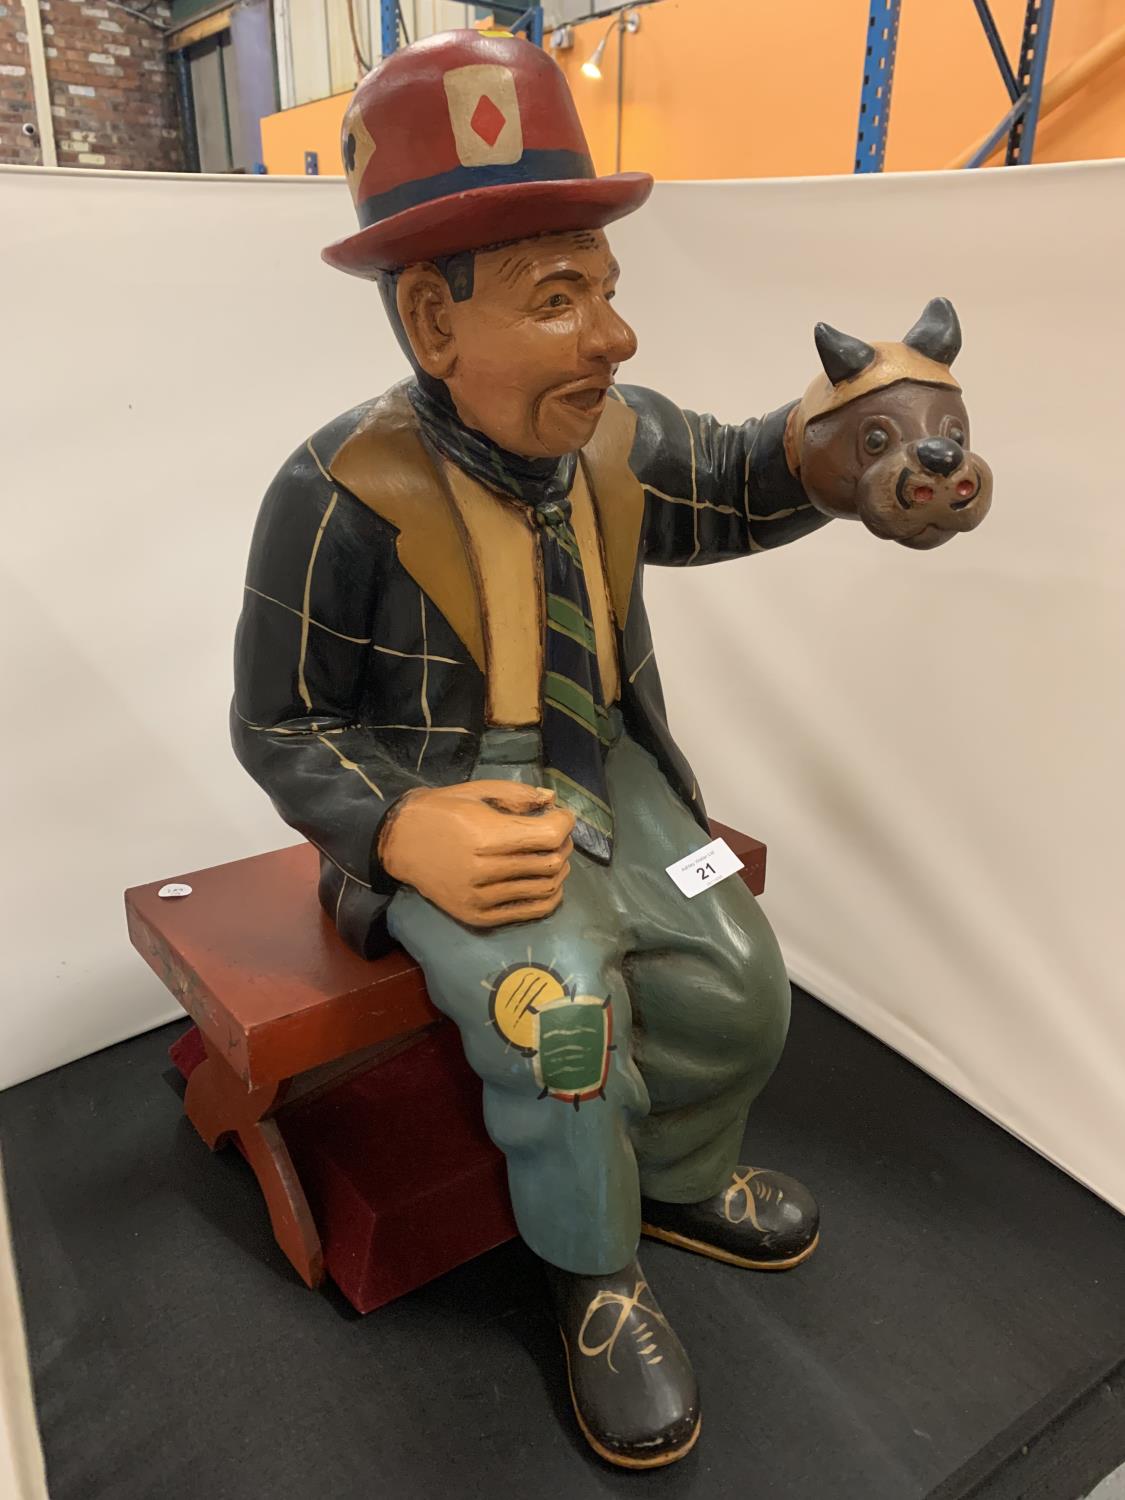 A LARGE RESIN CHARACTER ORNAMENT FEATURING A VENTRILOQUIST IN A BOWLER HAT SEATED ON A WOODEN BENCH - Image 2 of 3